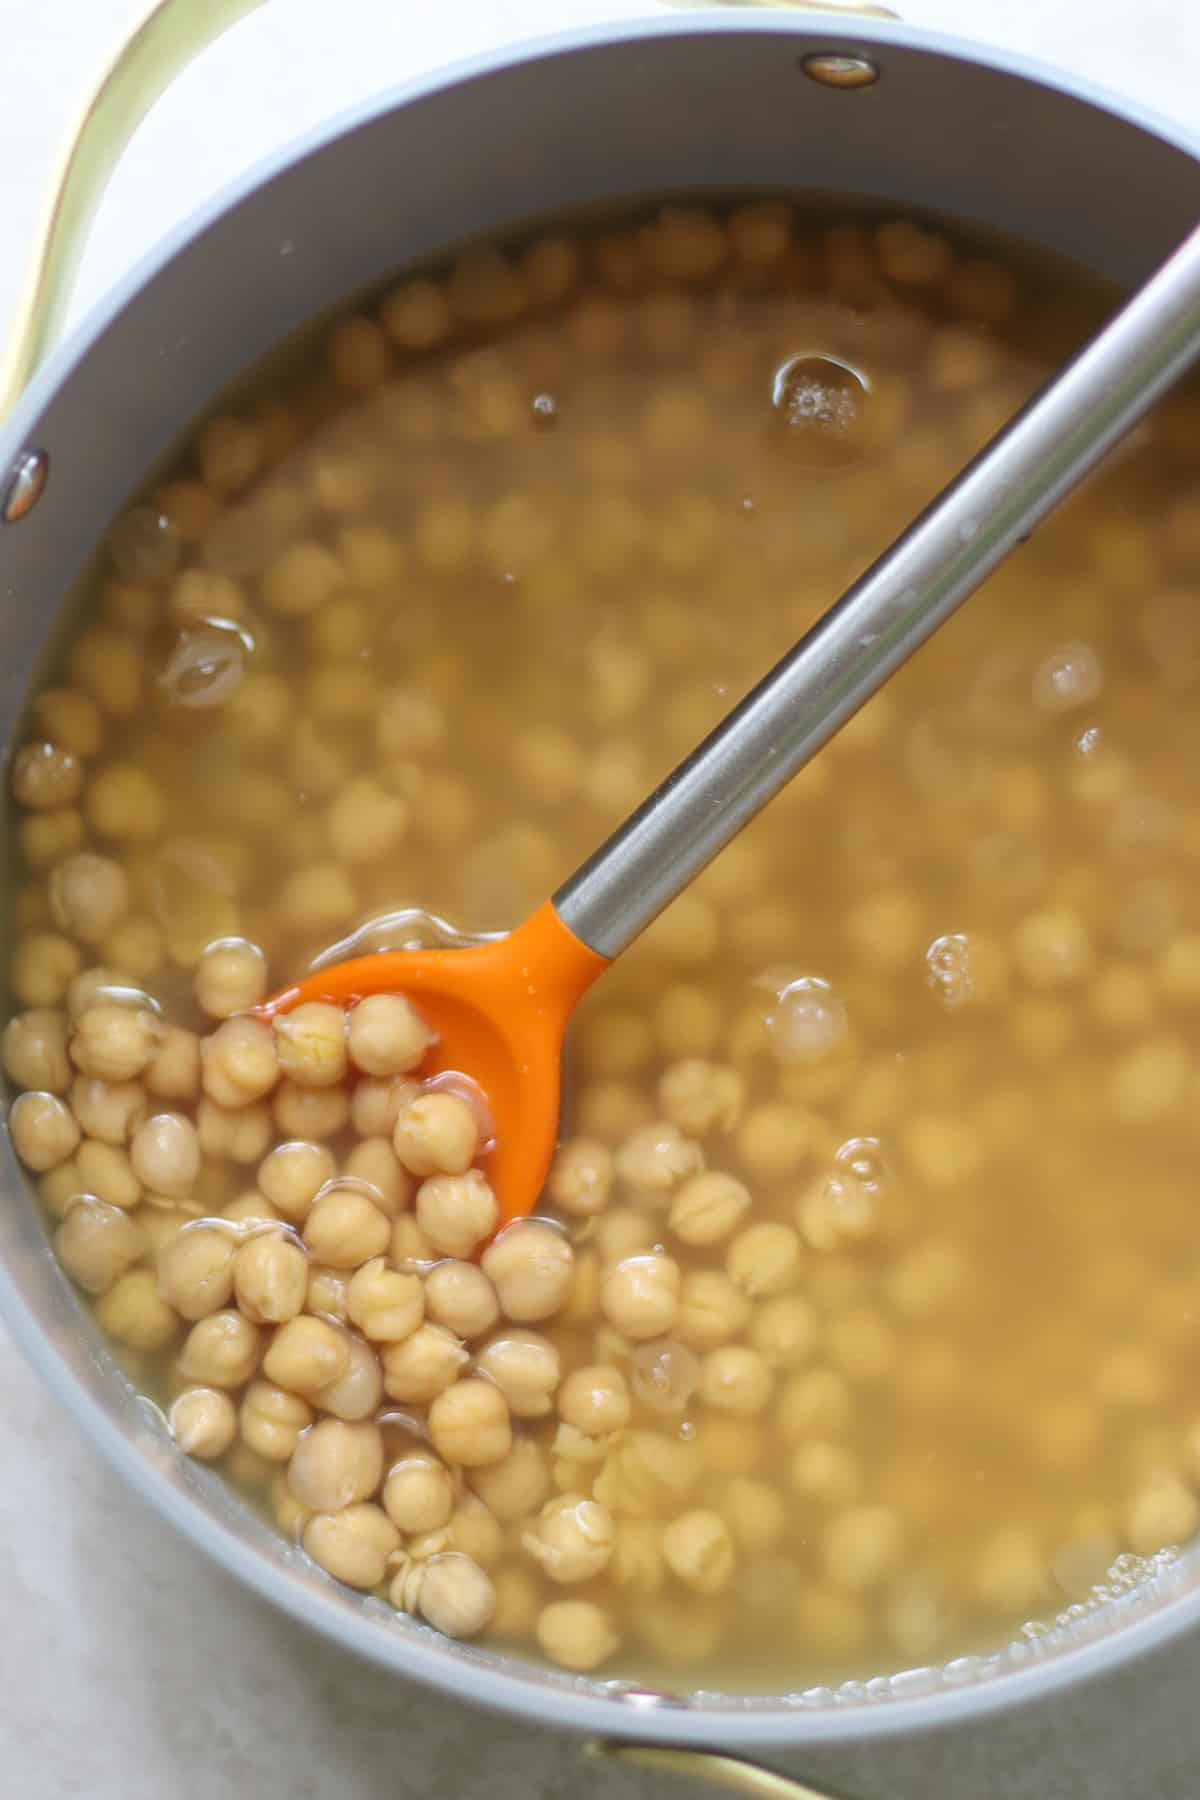 Cooked chickpeas in a large pot.